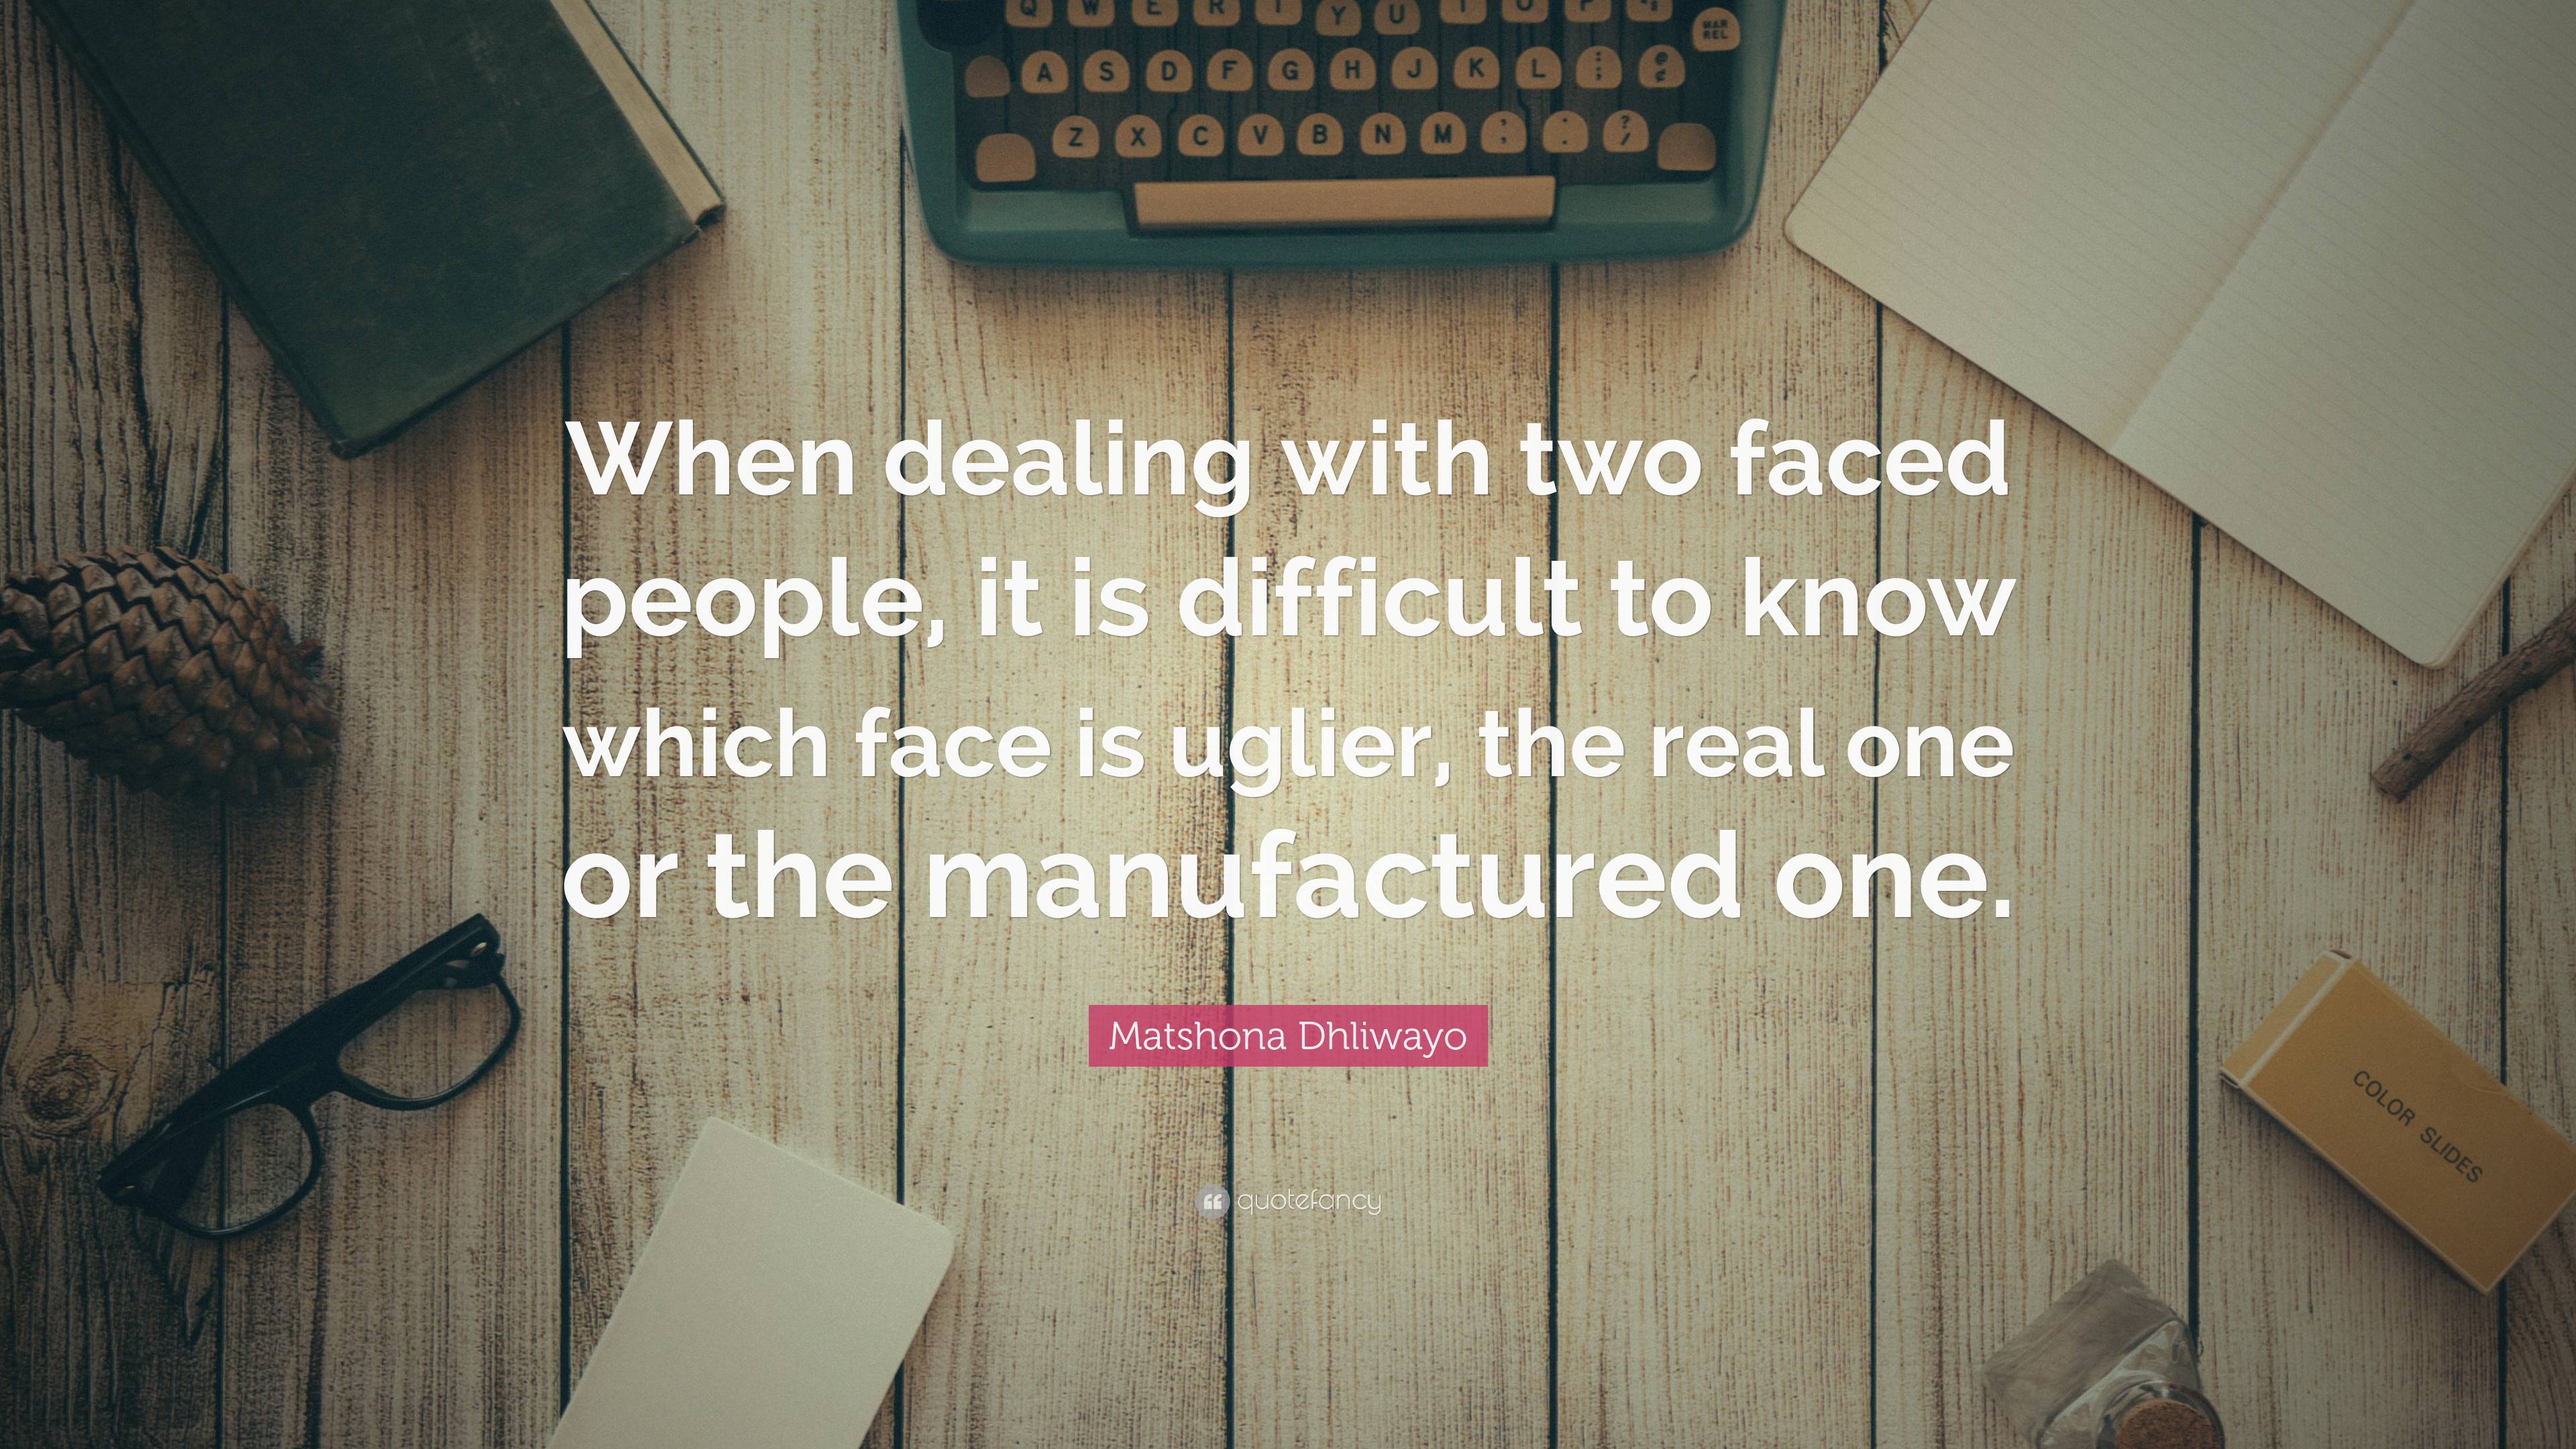 https://quotefancy.com/media/wallpaper/3840x2160/7223651-Matshona-Dhliwayo-Quote-When-dealing-with-two-faced-people-it-is.jpg